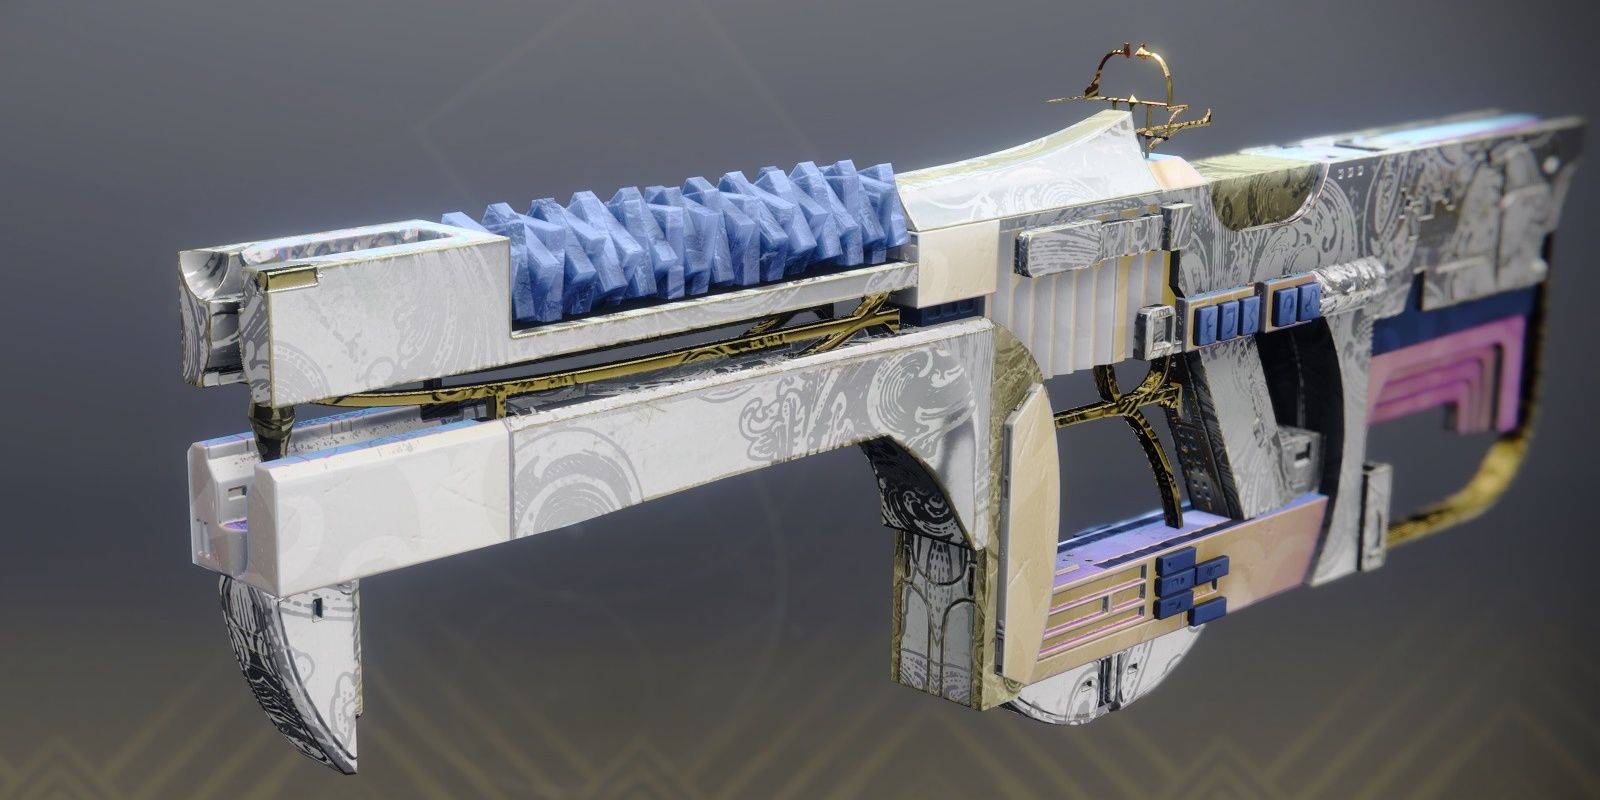 The Linear Fusion Rifle, Cataclysmic shaded with light colors on a gray background.